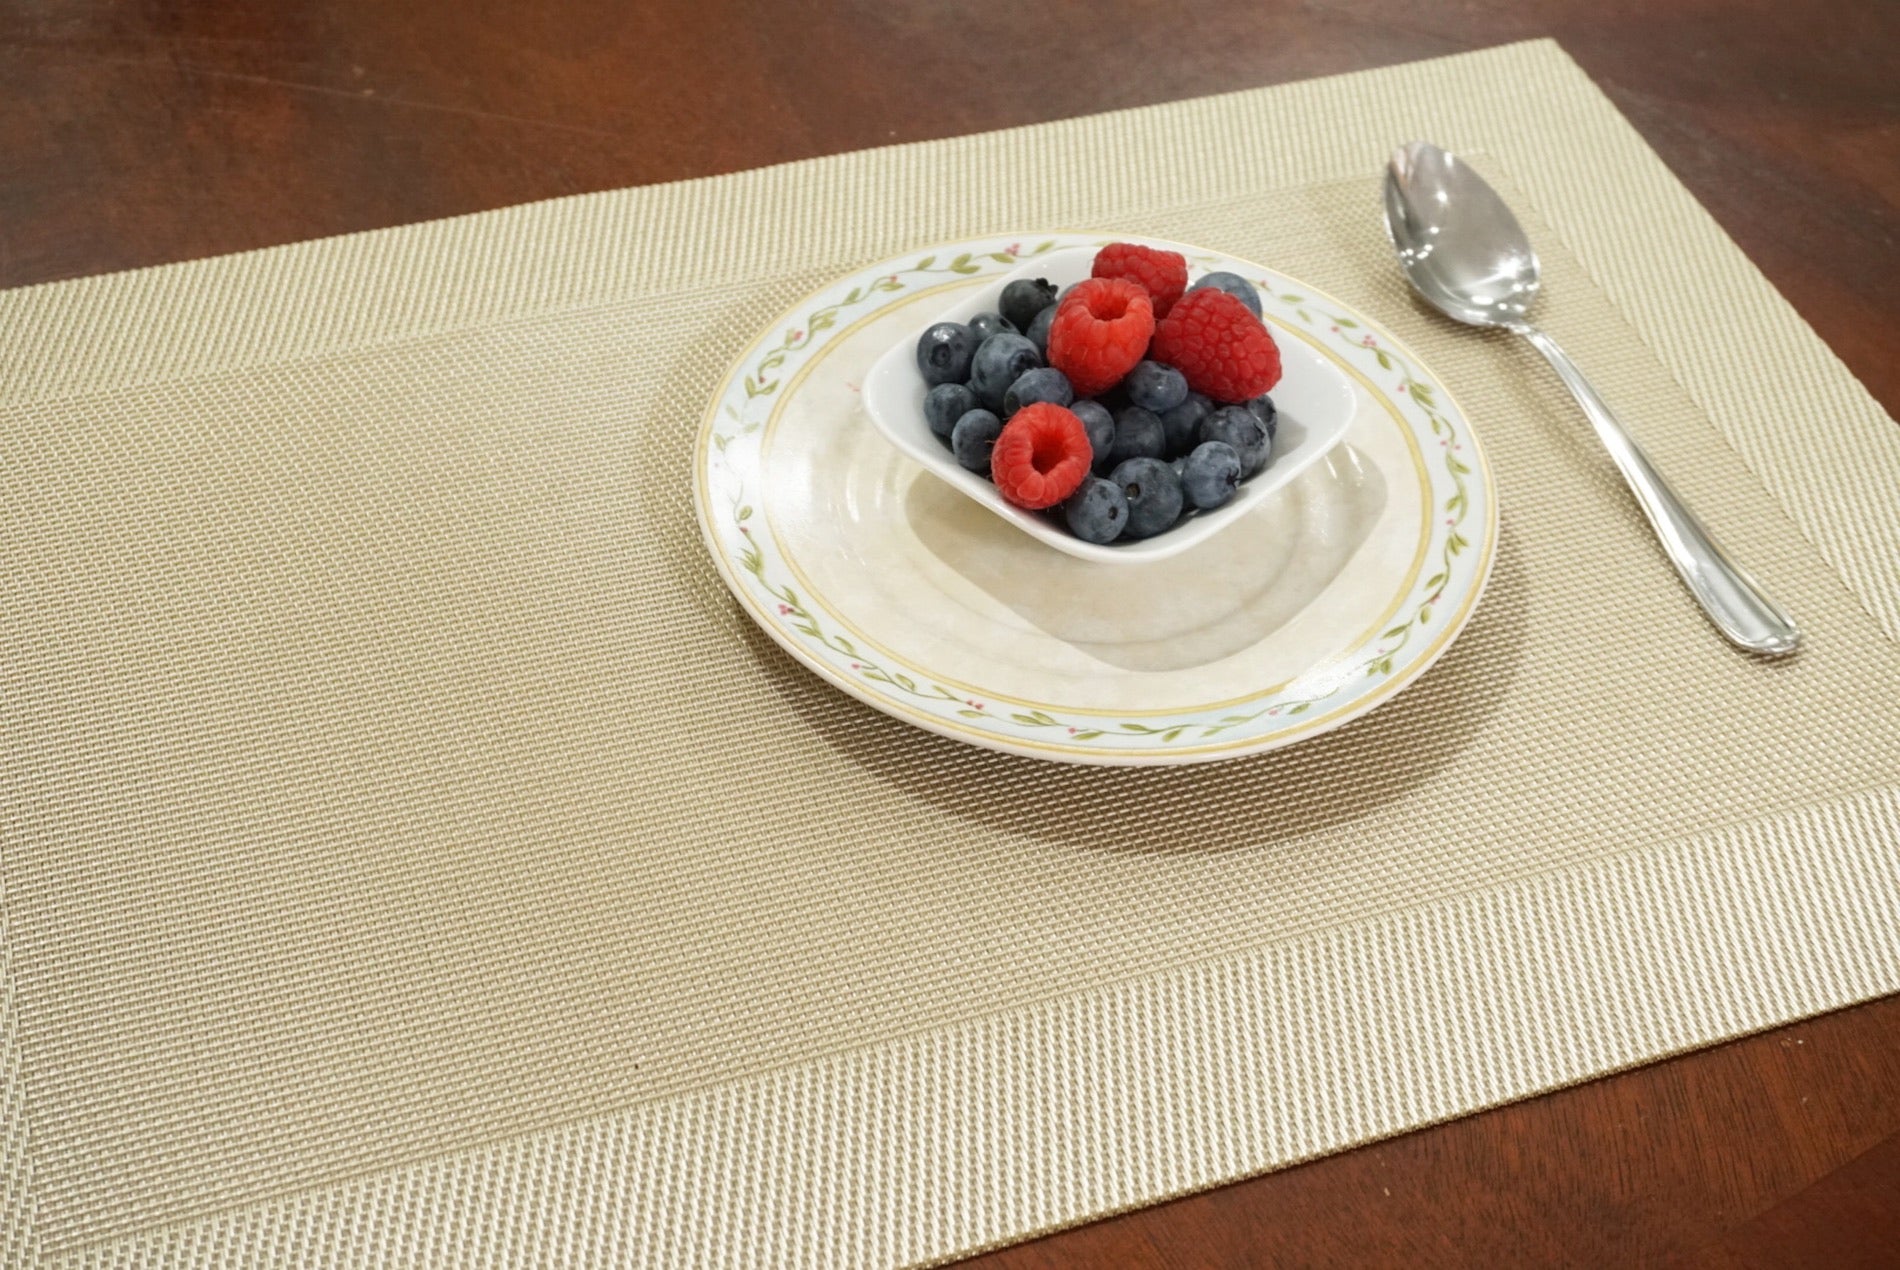 Dainty Home Napa Woven Textilene Crossweave With Solid Geometric Pattern Reversible 15" x 15" Square Placemats